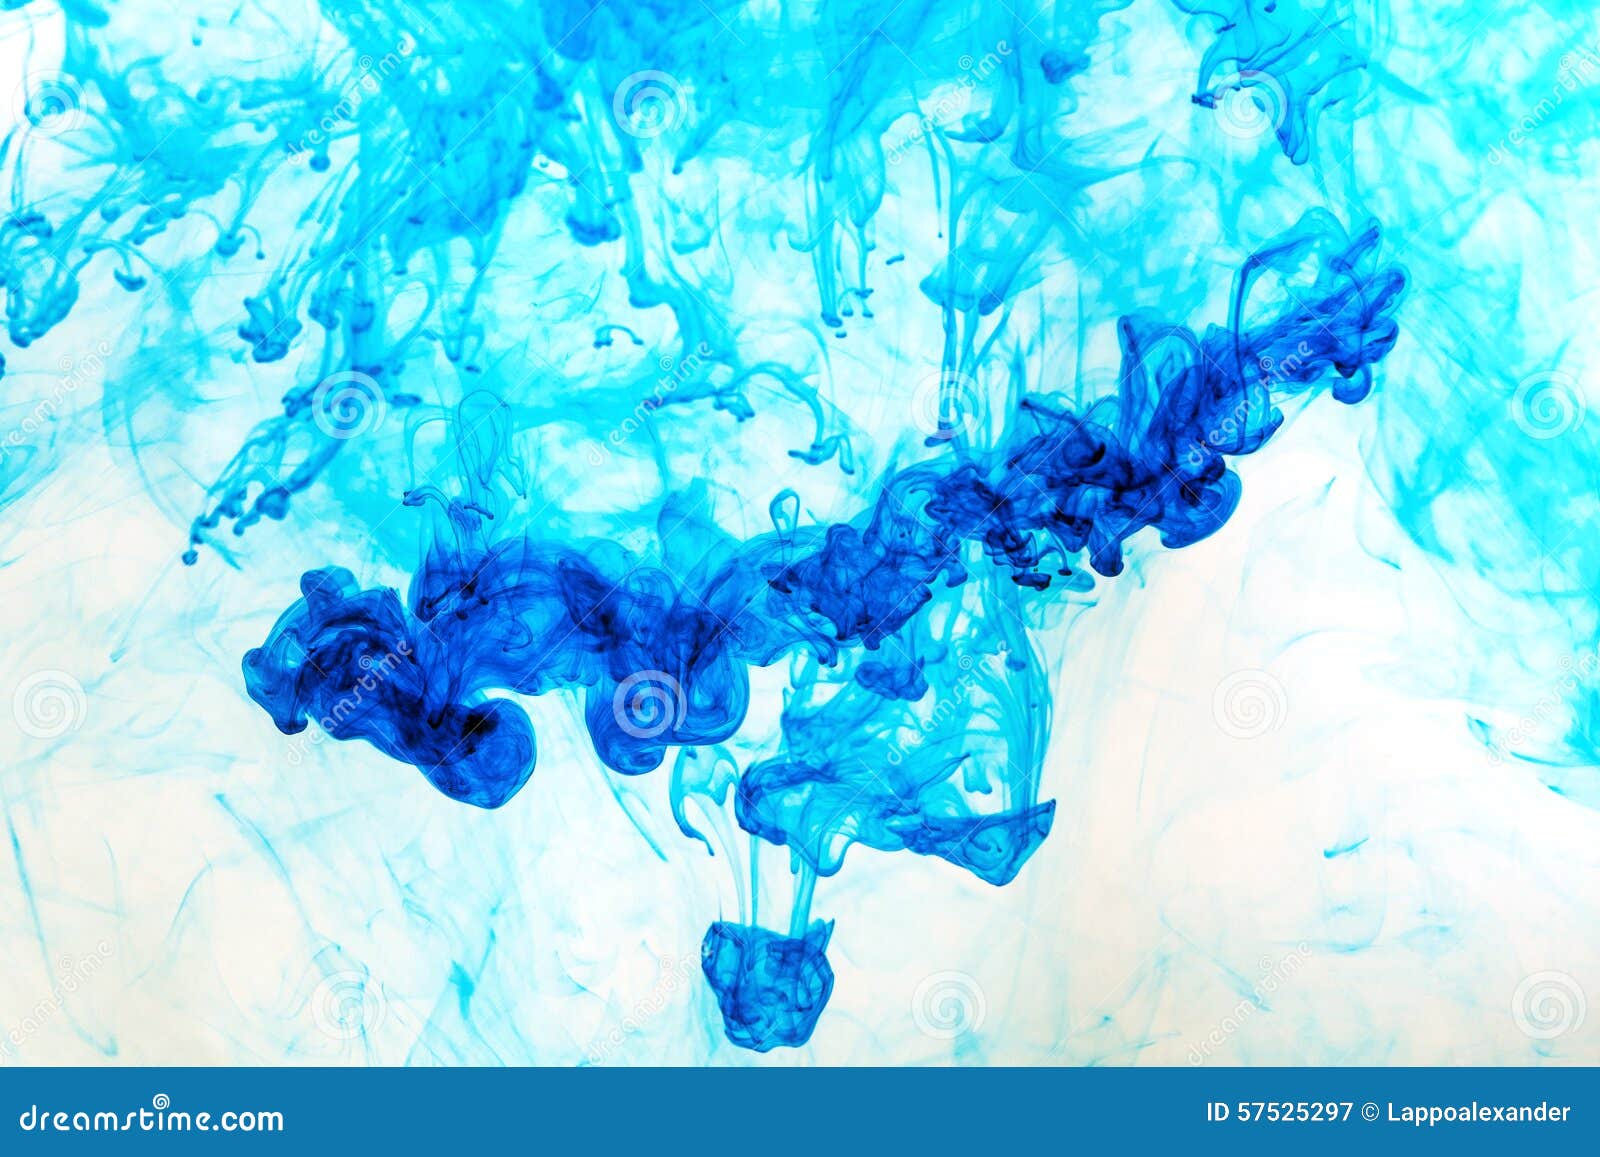 Abstract Blue Dye In Water Stock Photo - Image: 57525297